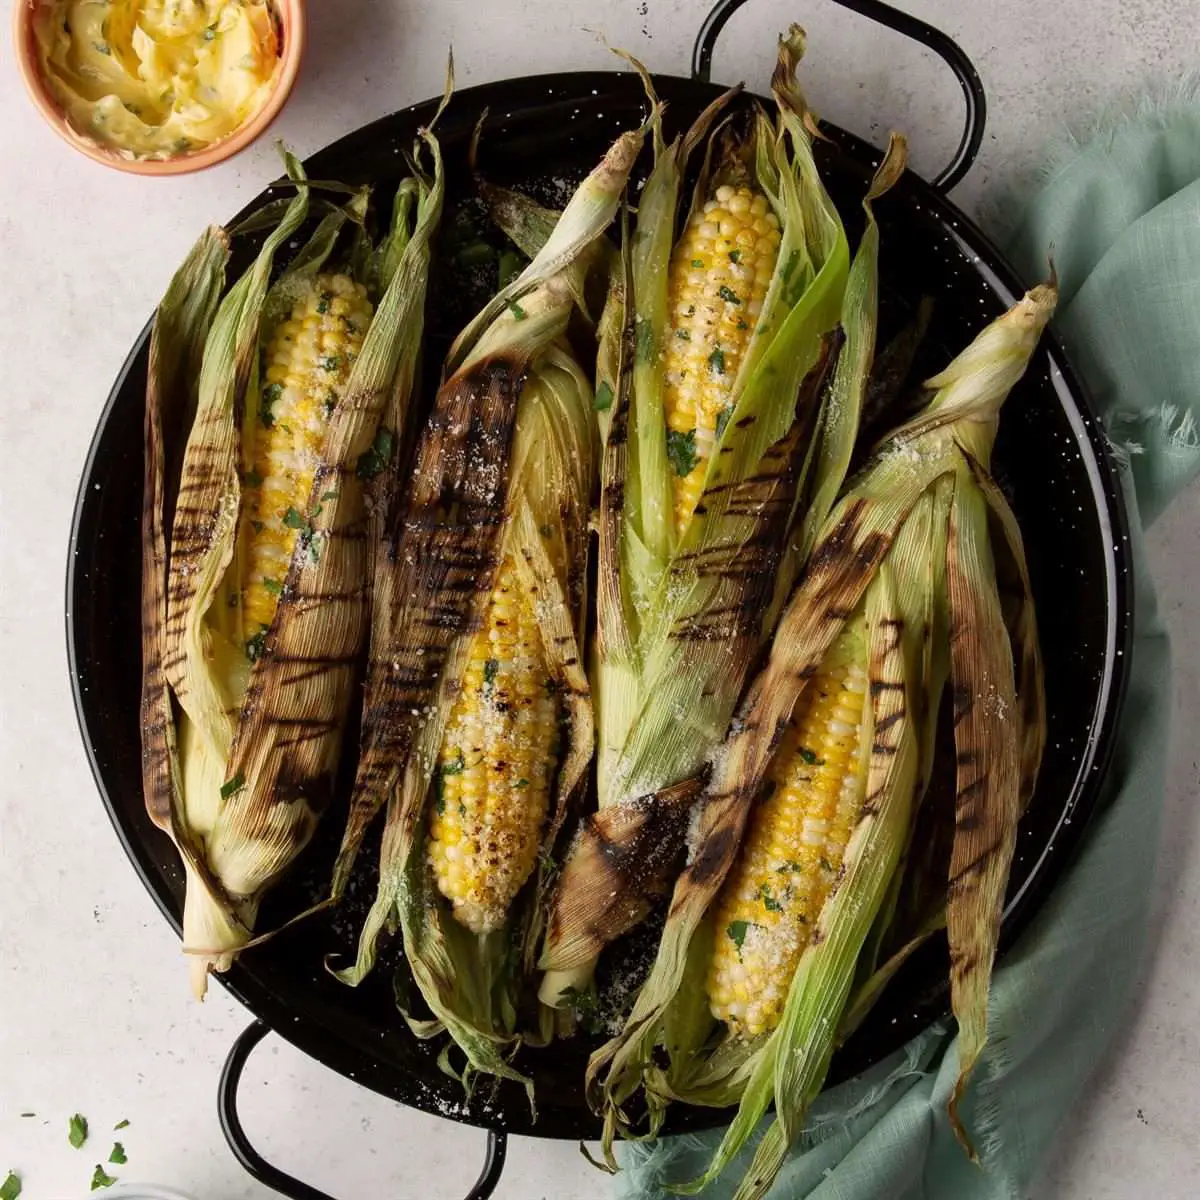 Grilled Corn in Husks Recipe: How to Make It